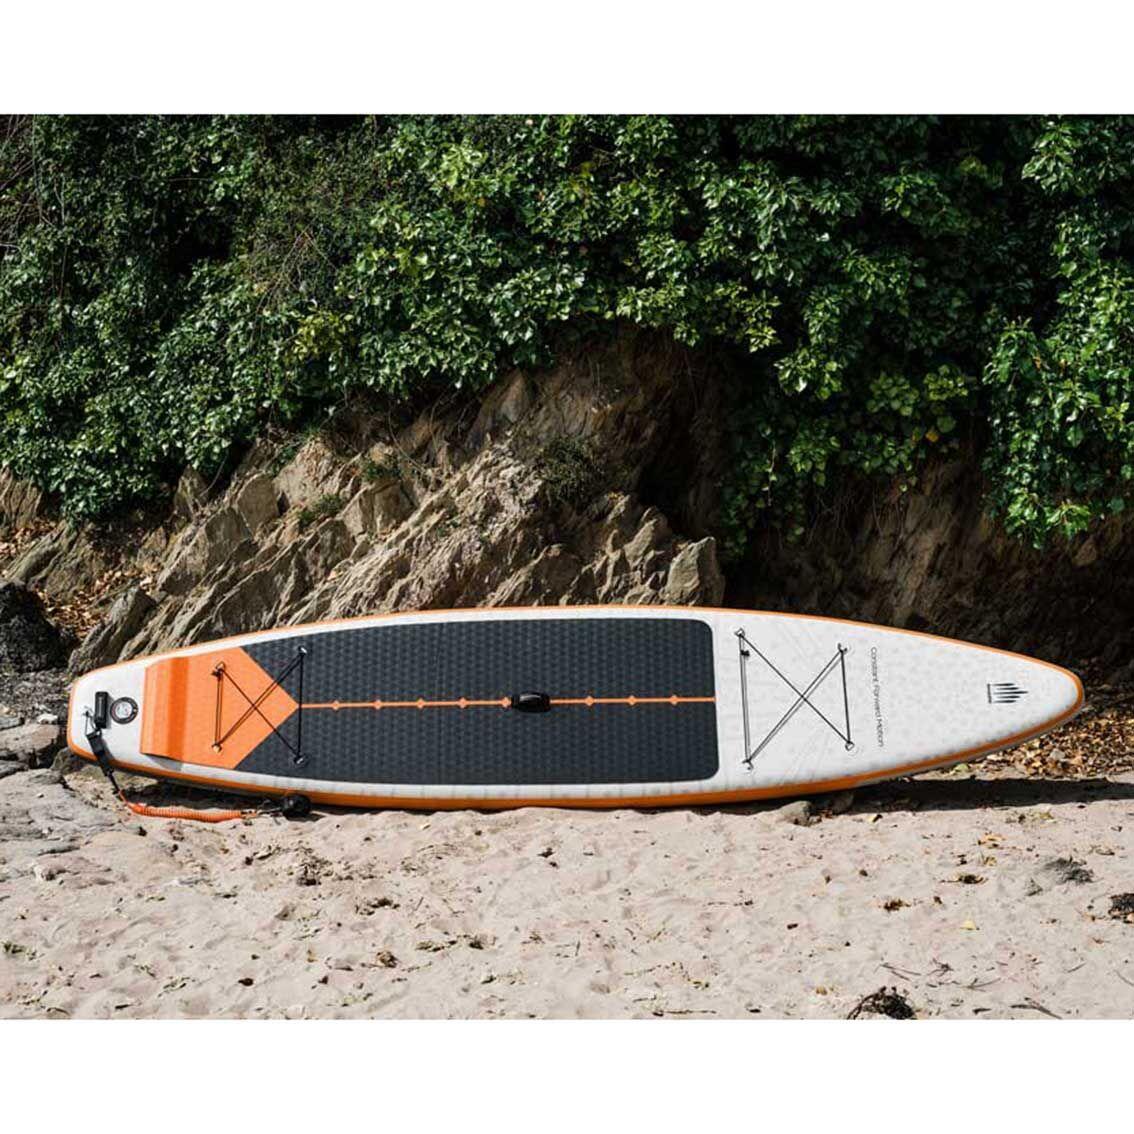 SHARK TOURING 12'6 x 30" x 6" FOR WANTING SPEED AND GLIDE 2/5